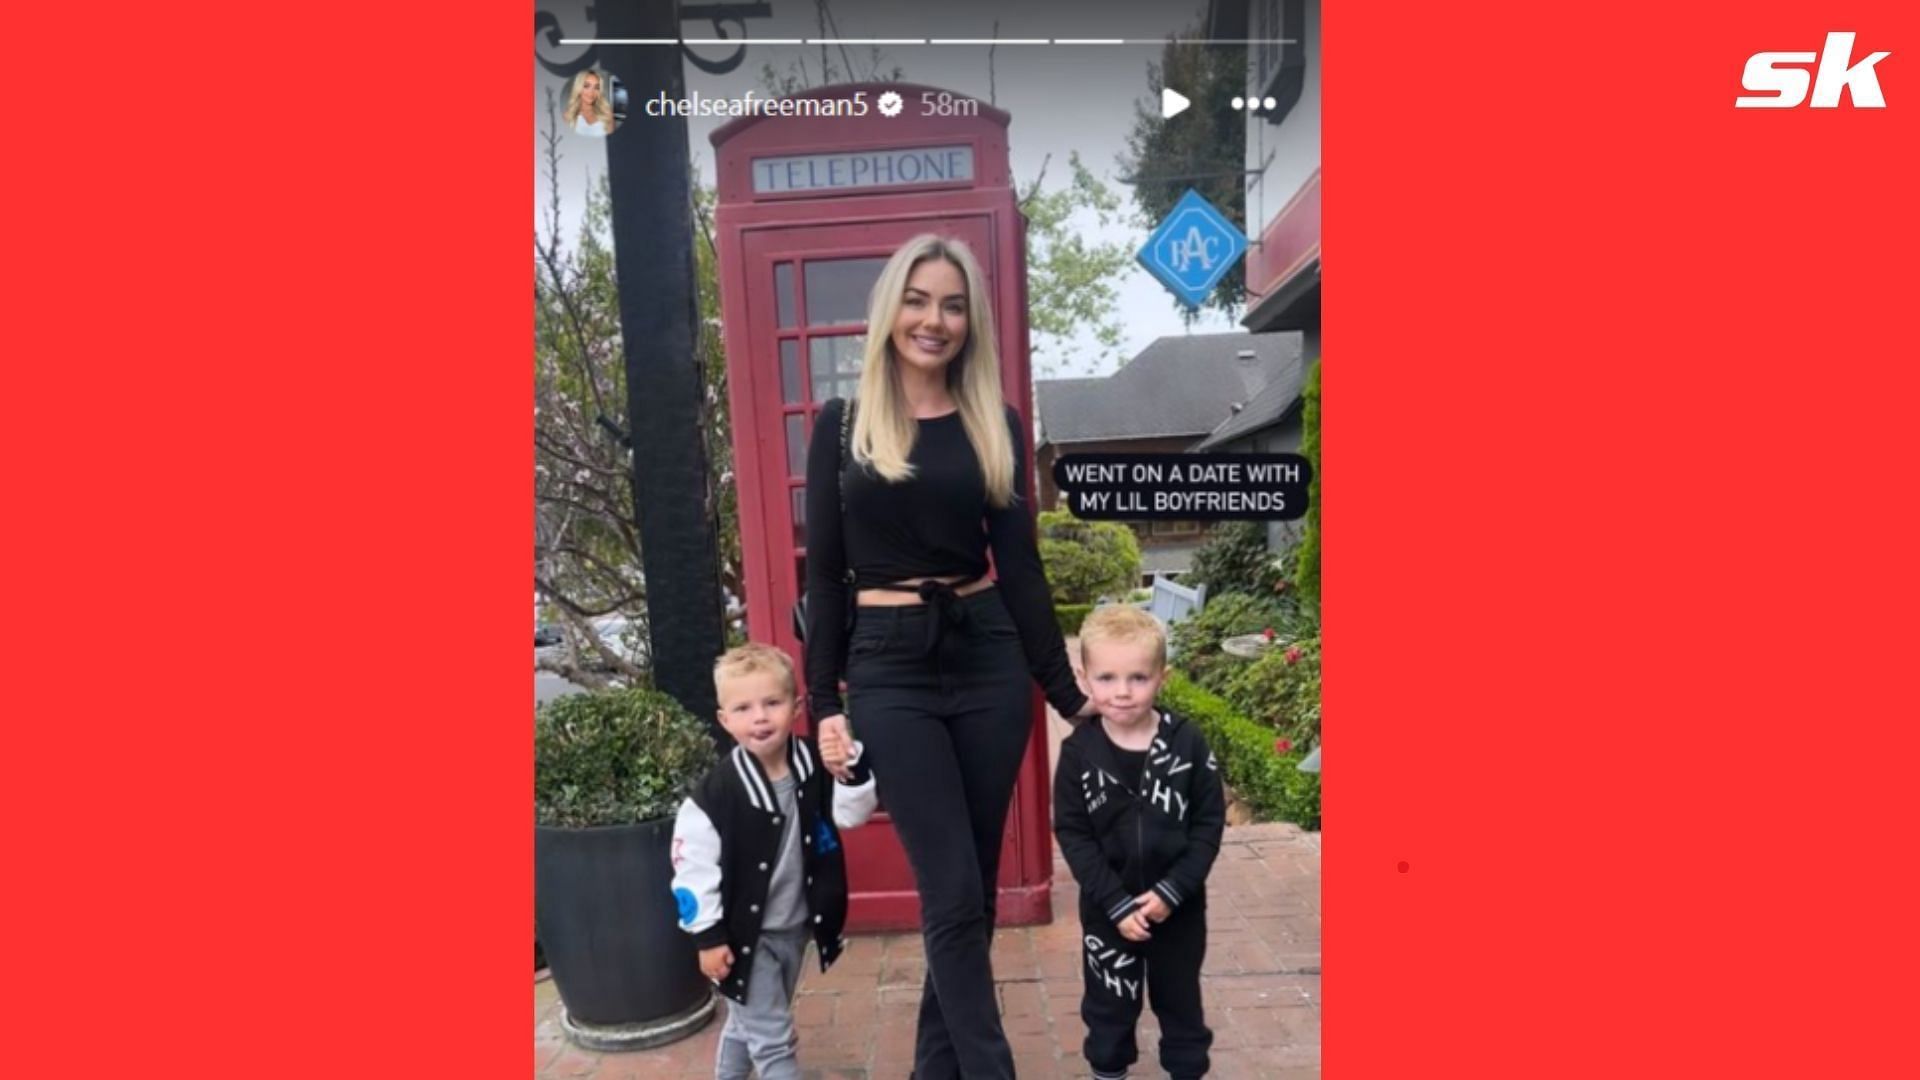 Chelsea Freeman showed off her coordinated outfits with sons Brandon and Max